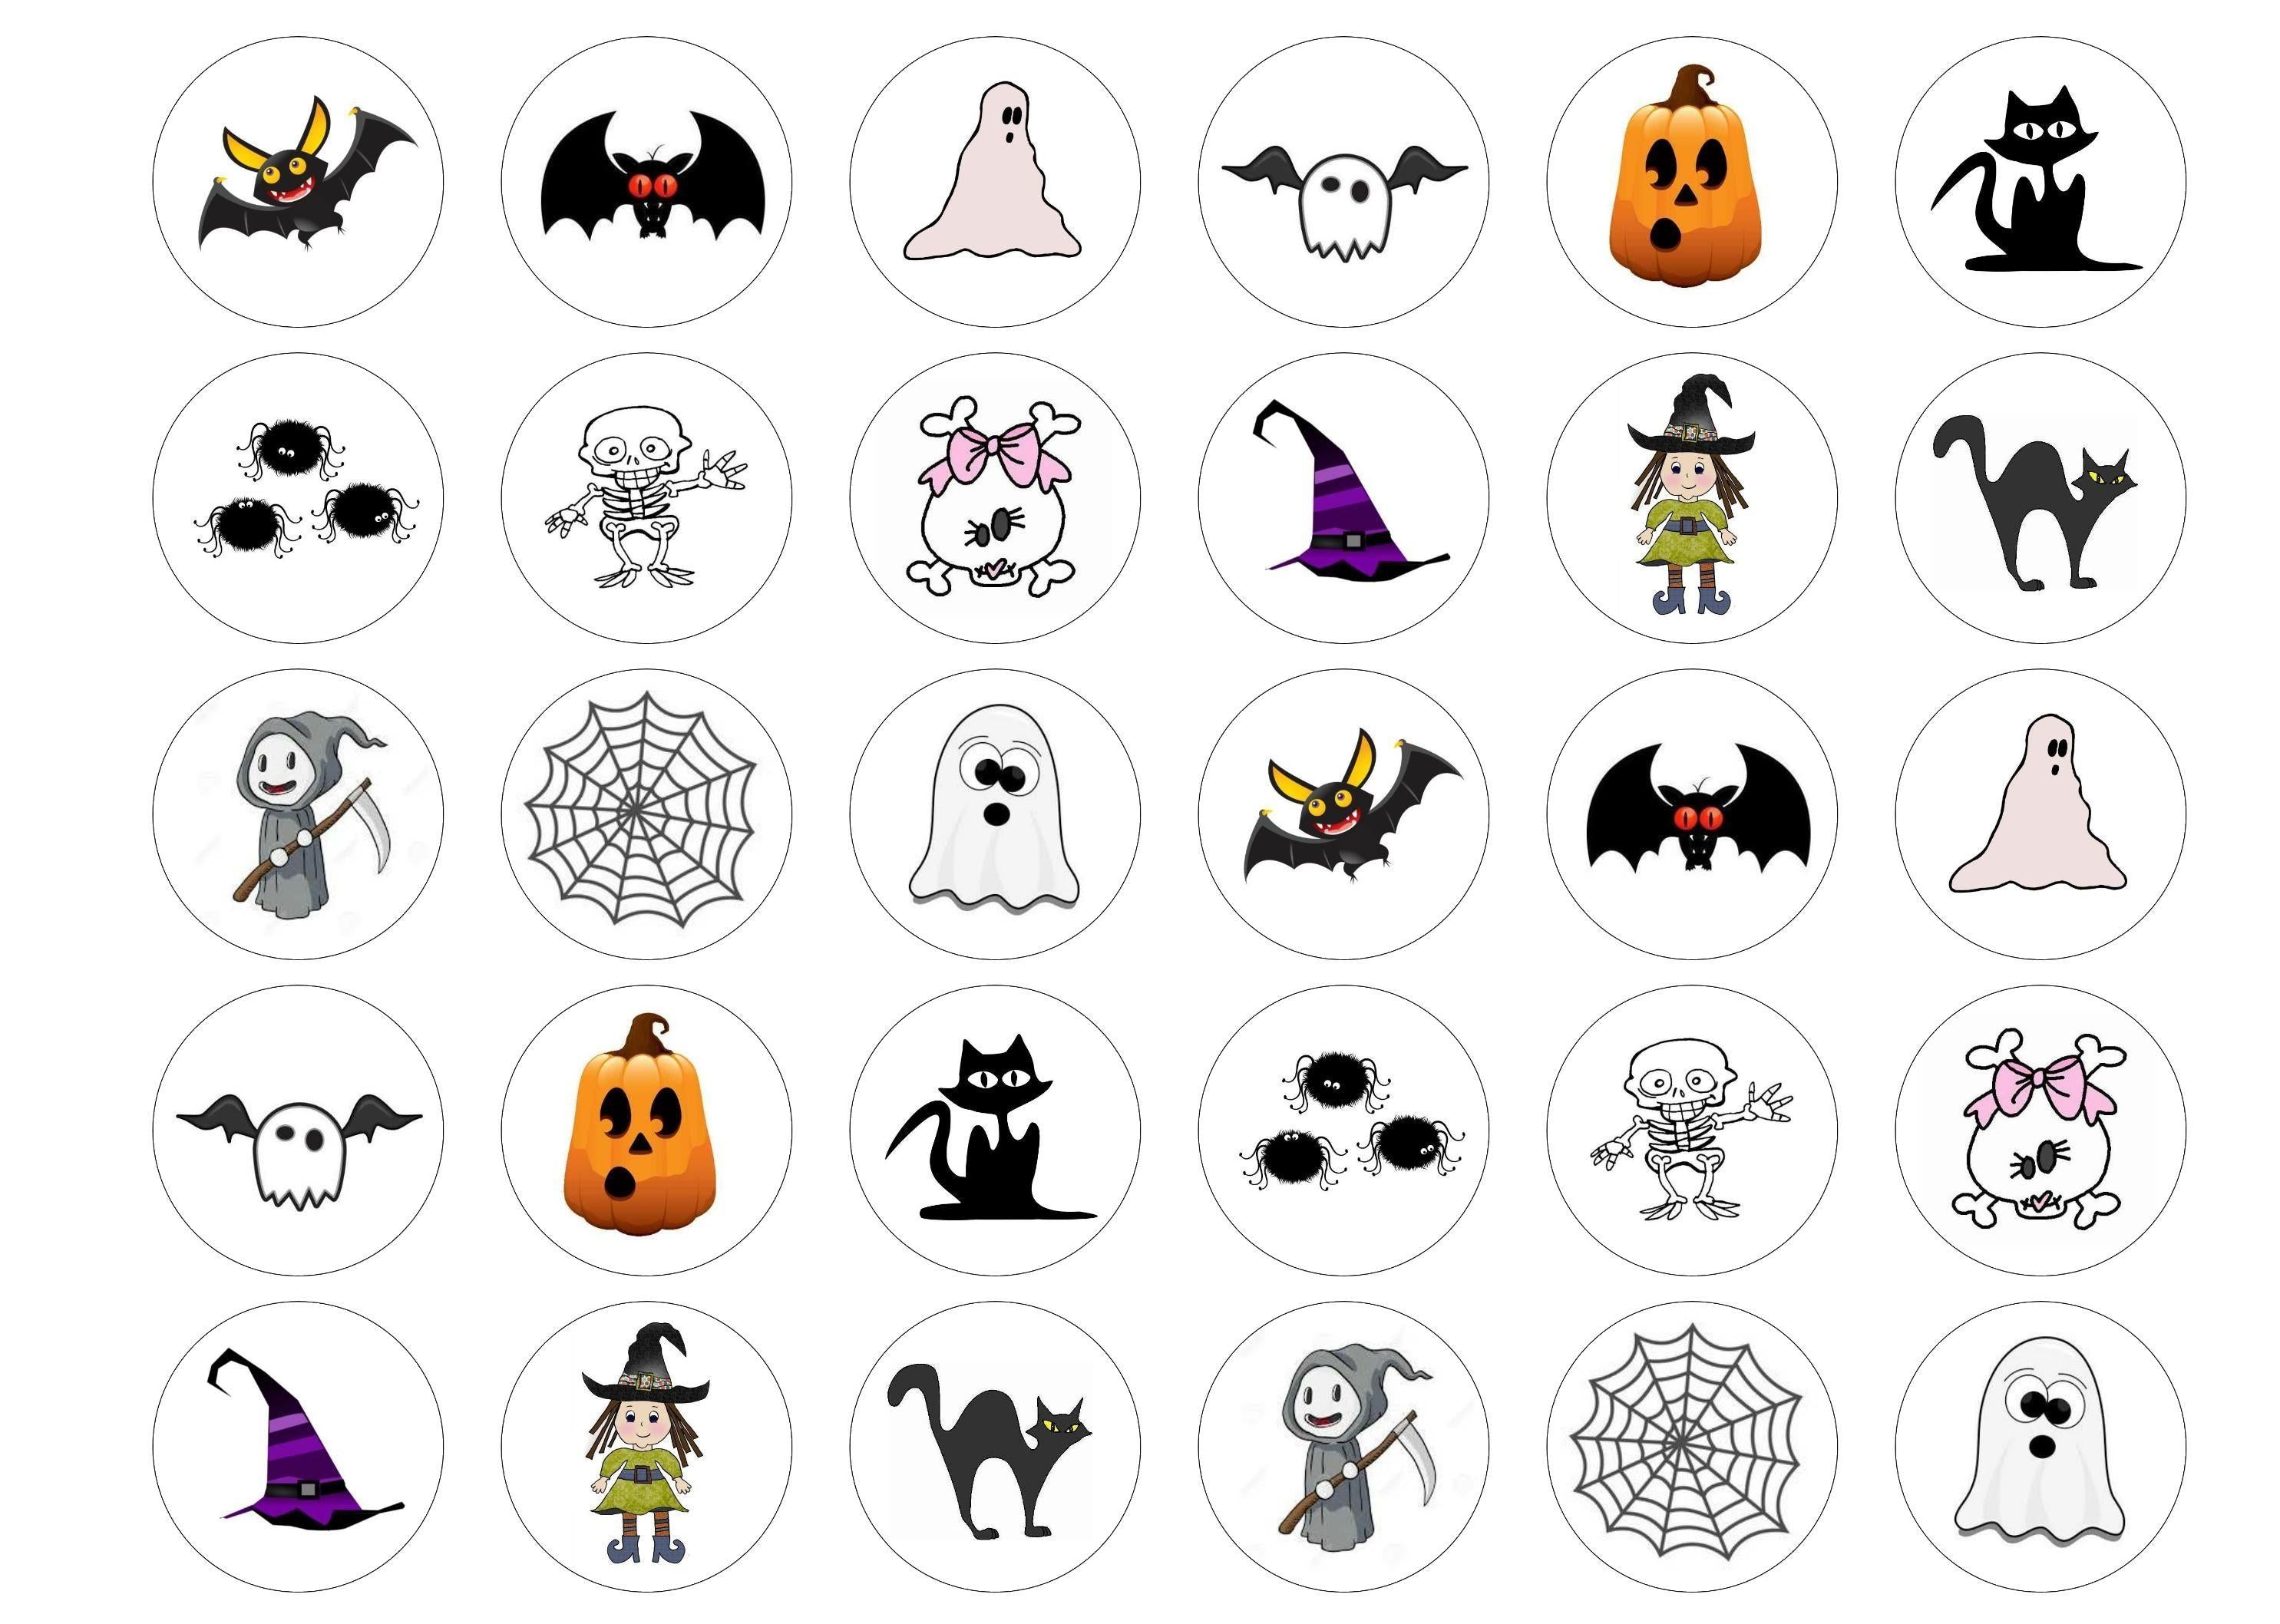 Printed edible cupcake toppers for halloween